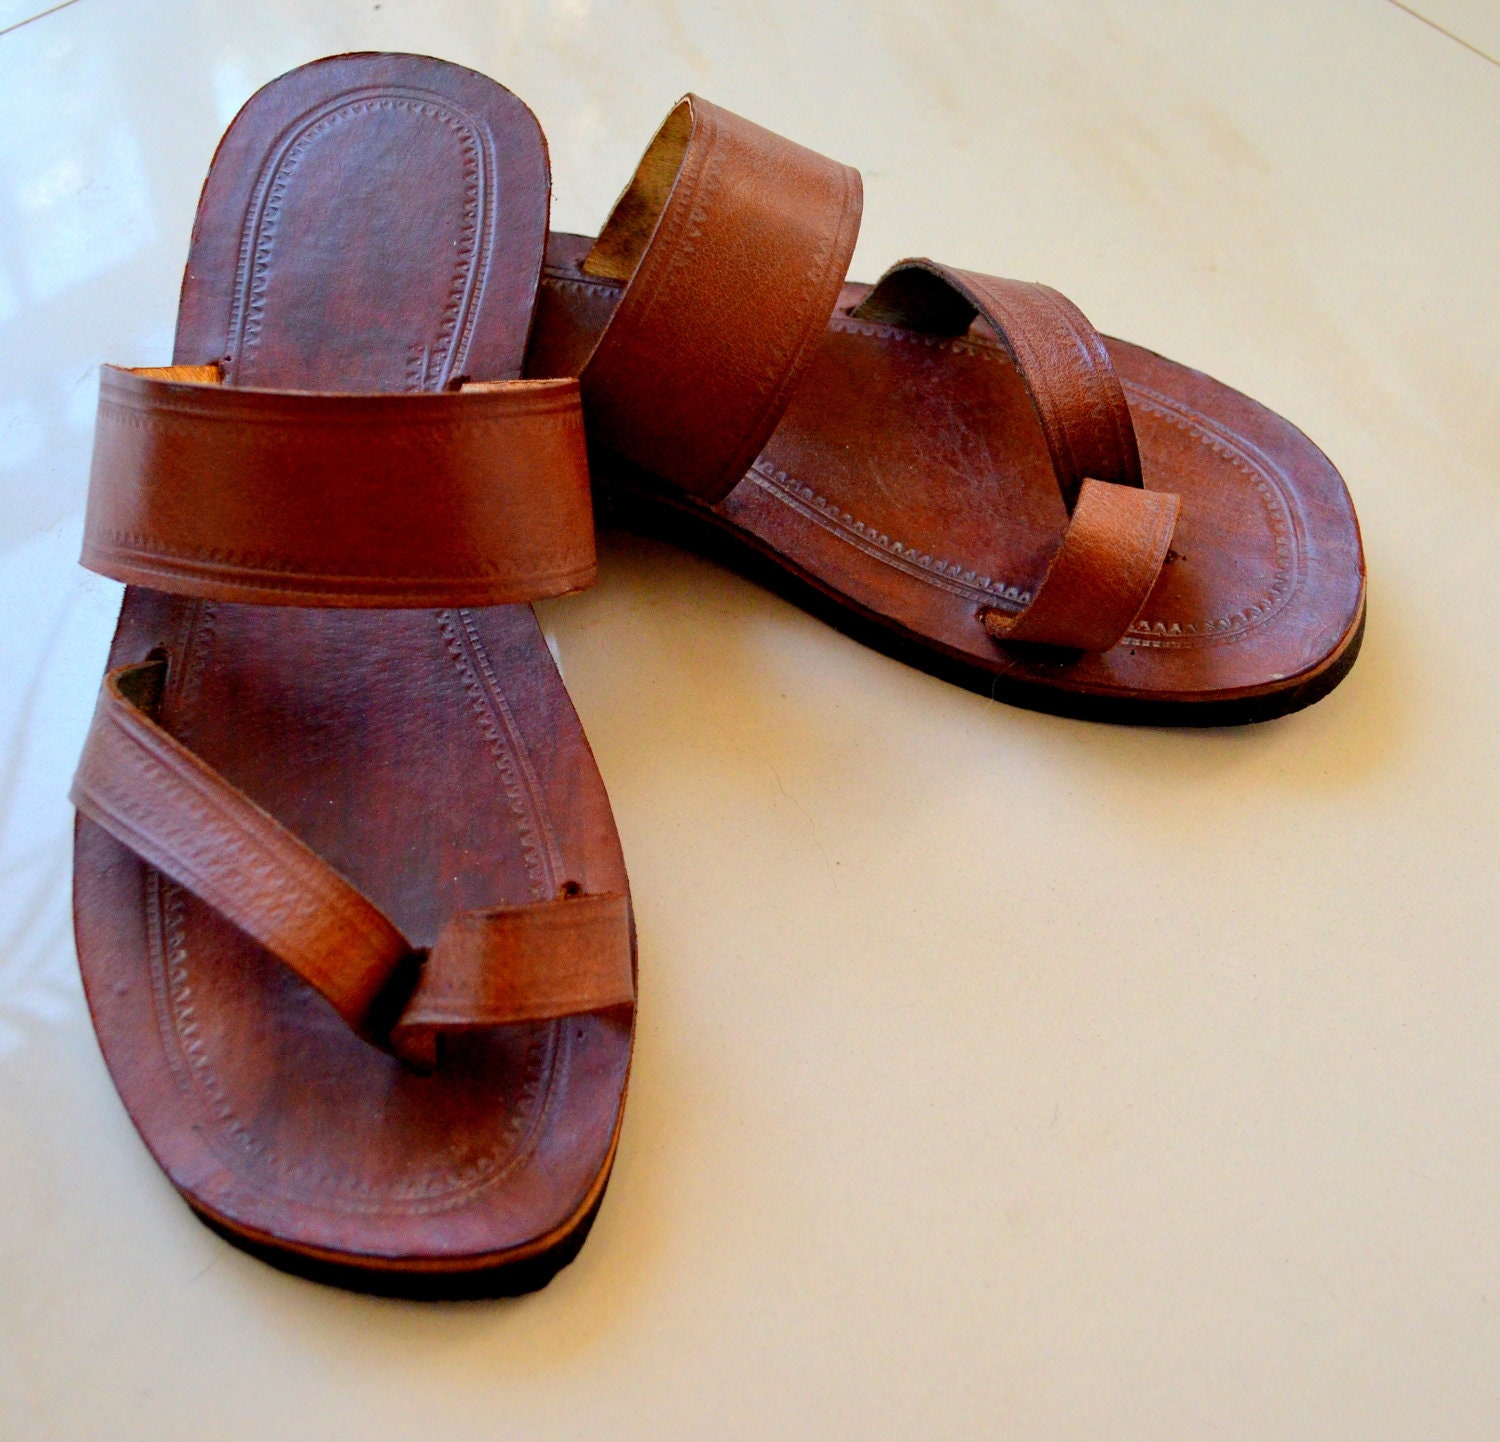 Single Band Leather Sandals Handmade Indian by IncredibleIndia